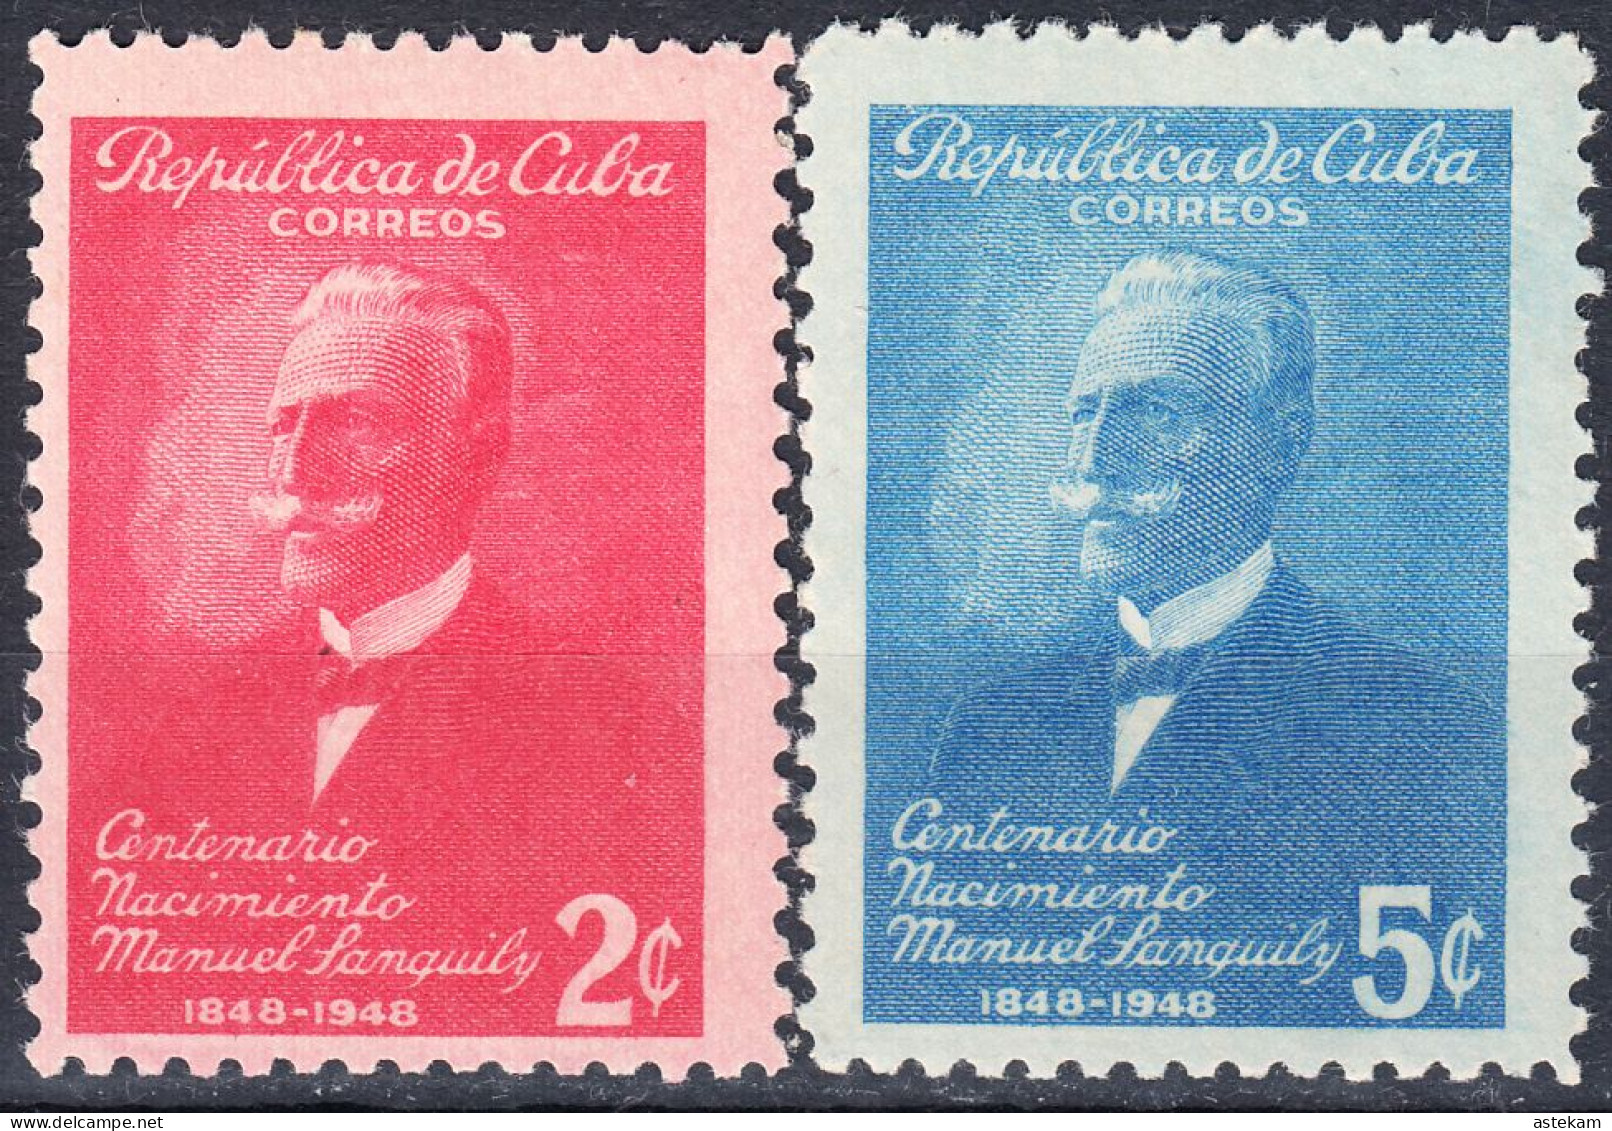 CUBA 1949, 100 YEARS From The BIRTH Of MANUEL SANGUILY-POET, COMPLETE, MNH SERIES With GOOD QUALITY, *** - Nuevos